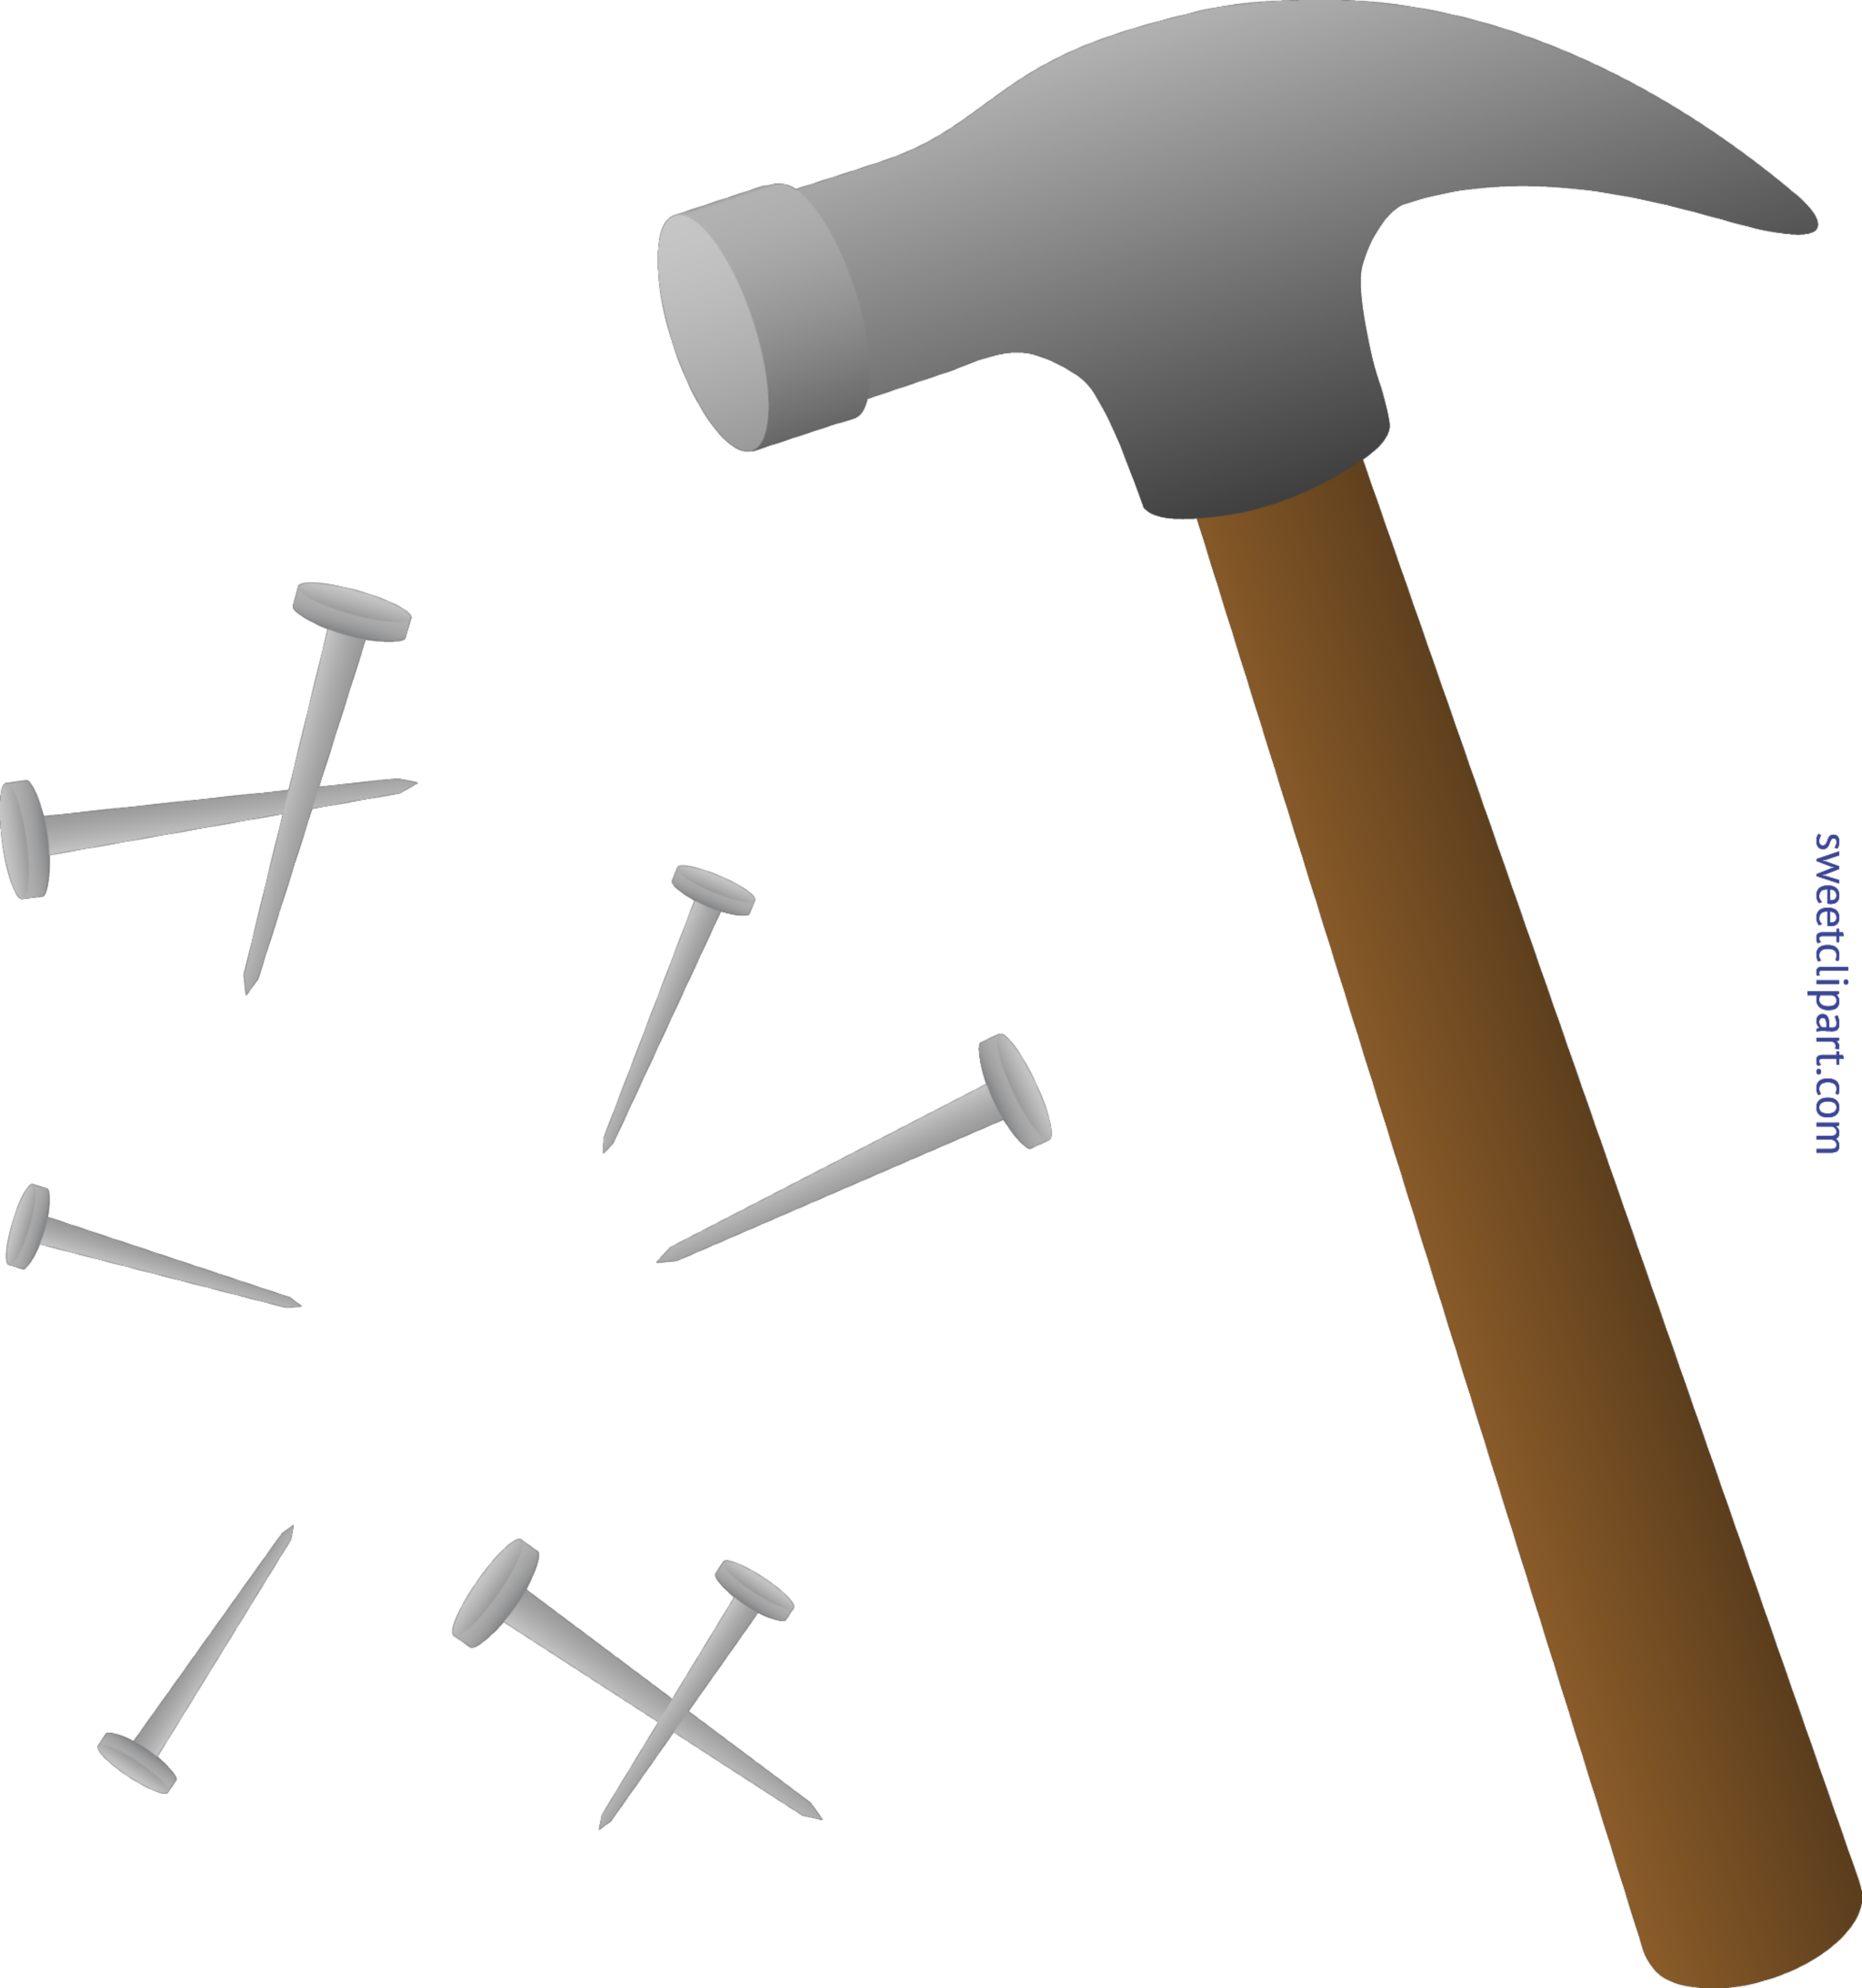 Xylophone clipart tool. Hammer and nails clip